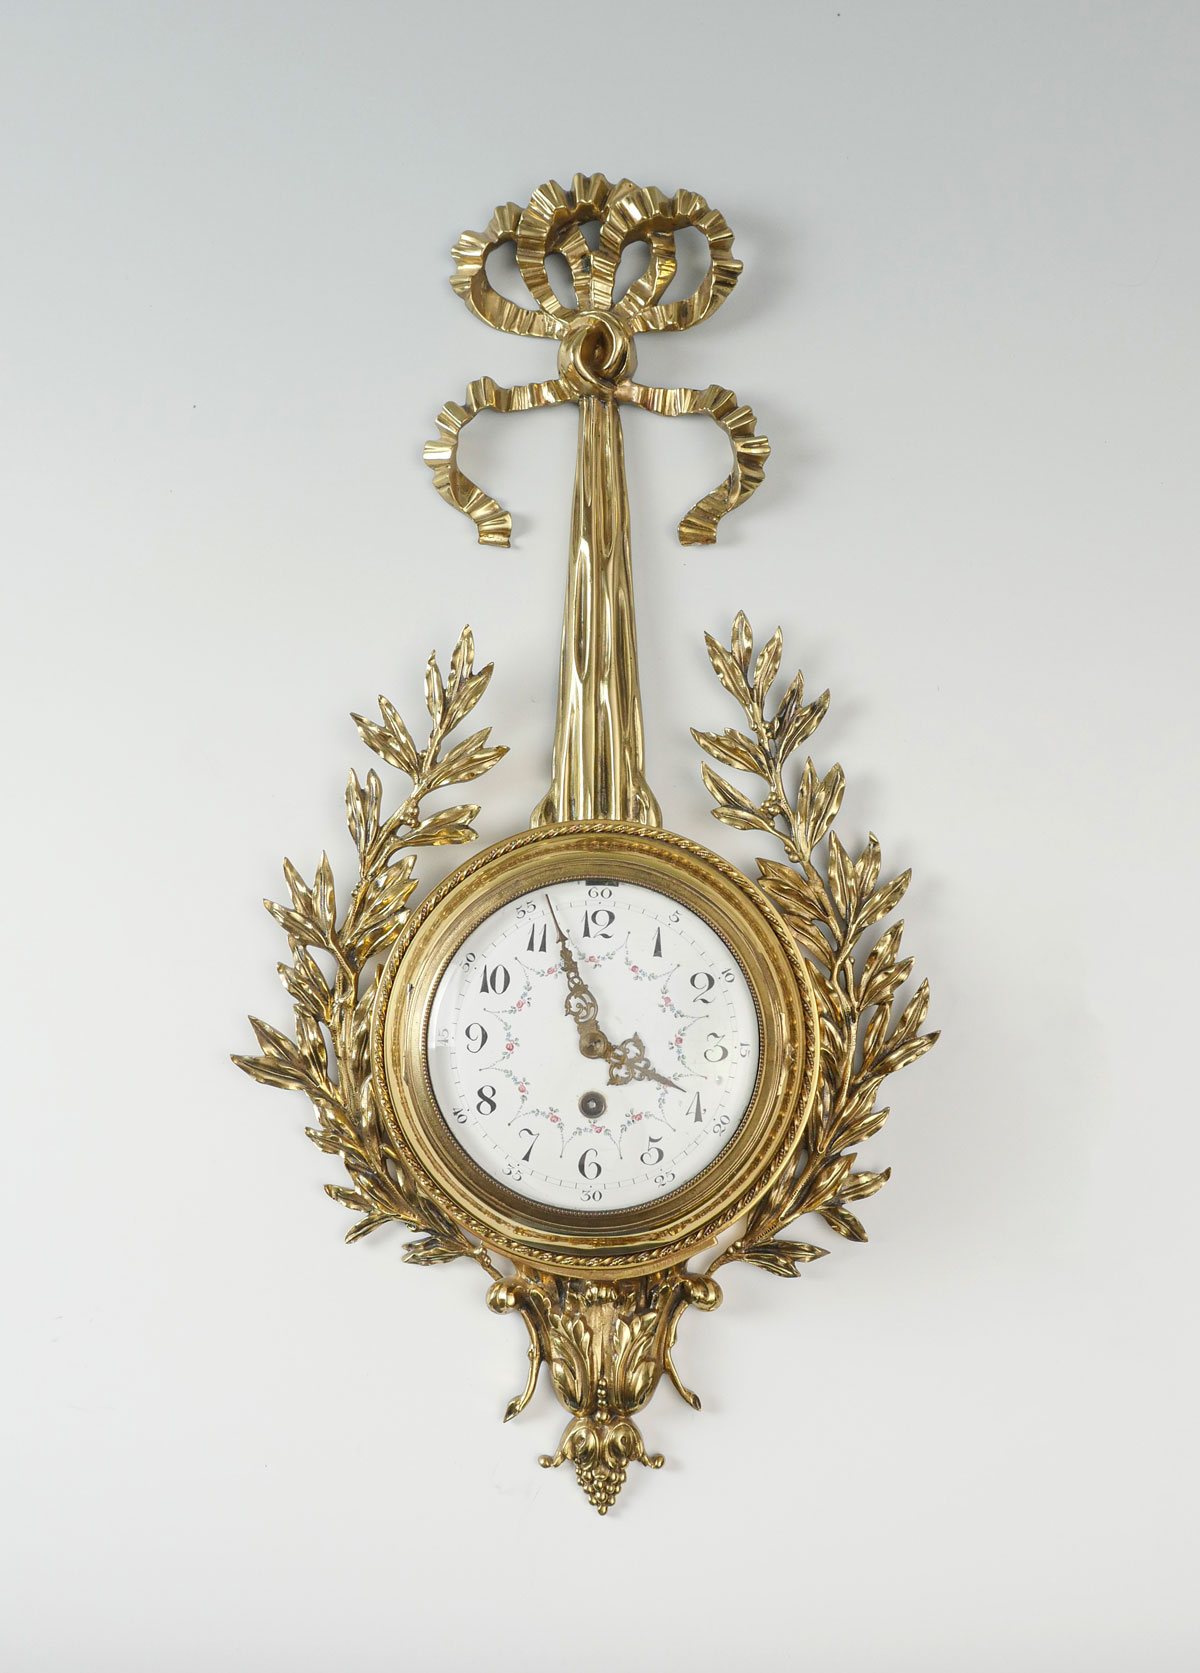 FRENCH CARTEL CLOCK: French Cartel